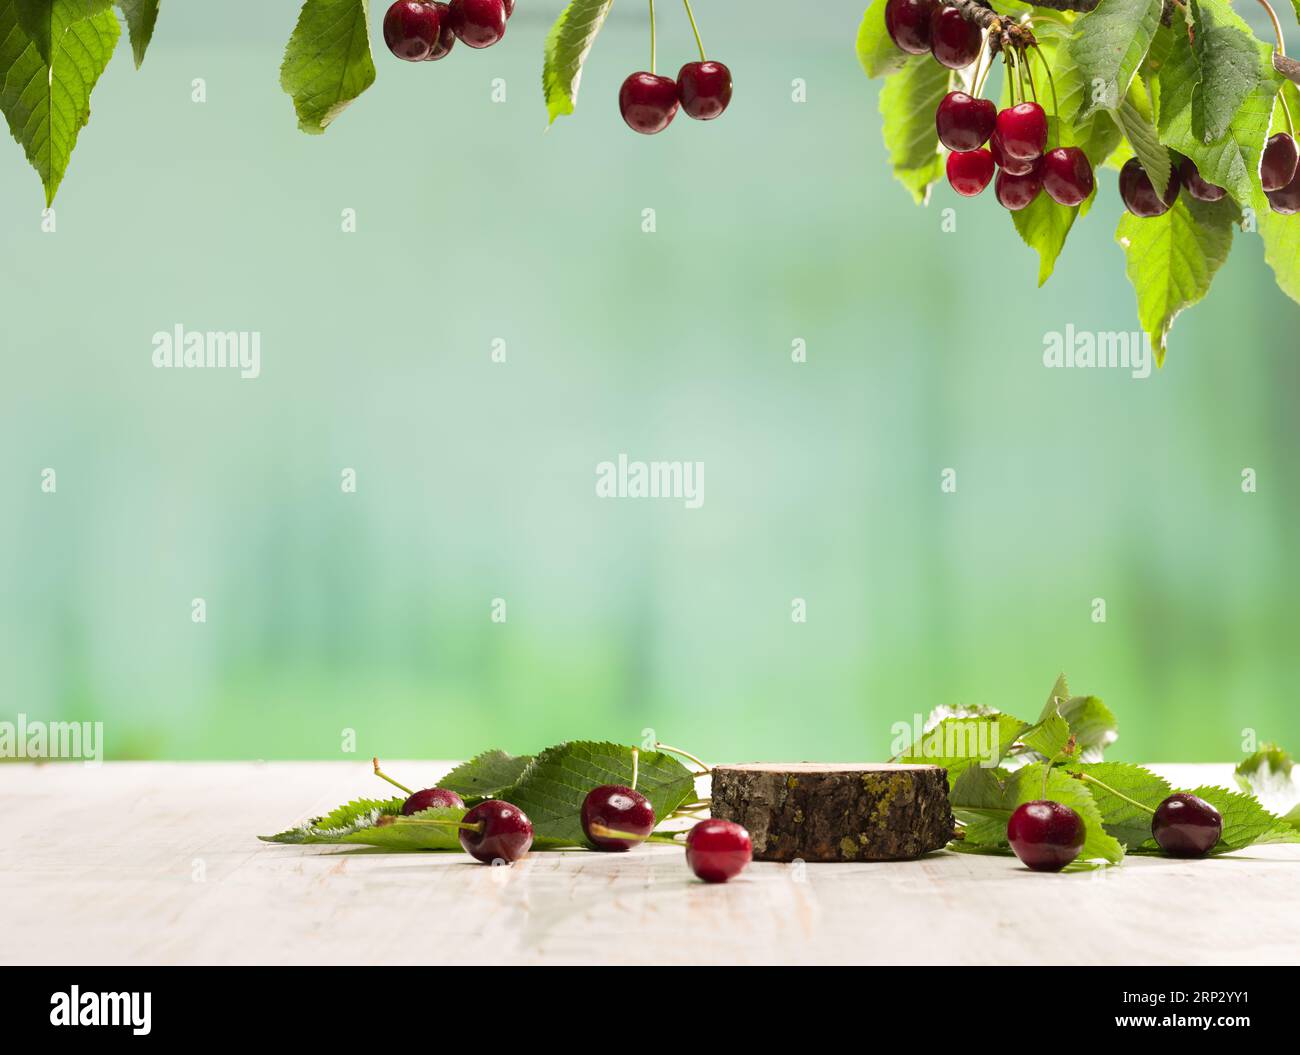 Wooden table under a cherry tree. White lacquered wooden table with cherries and wooden stand or podium.  For product display Stock Photo